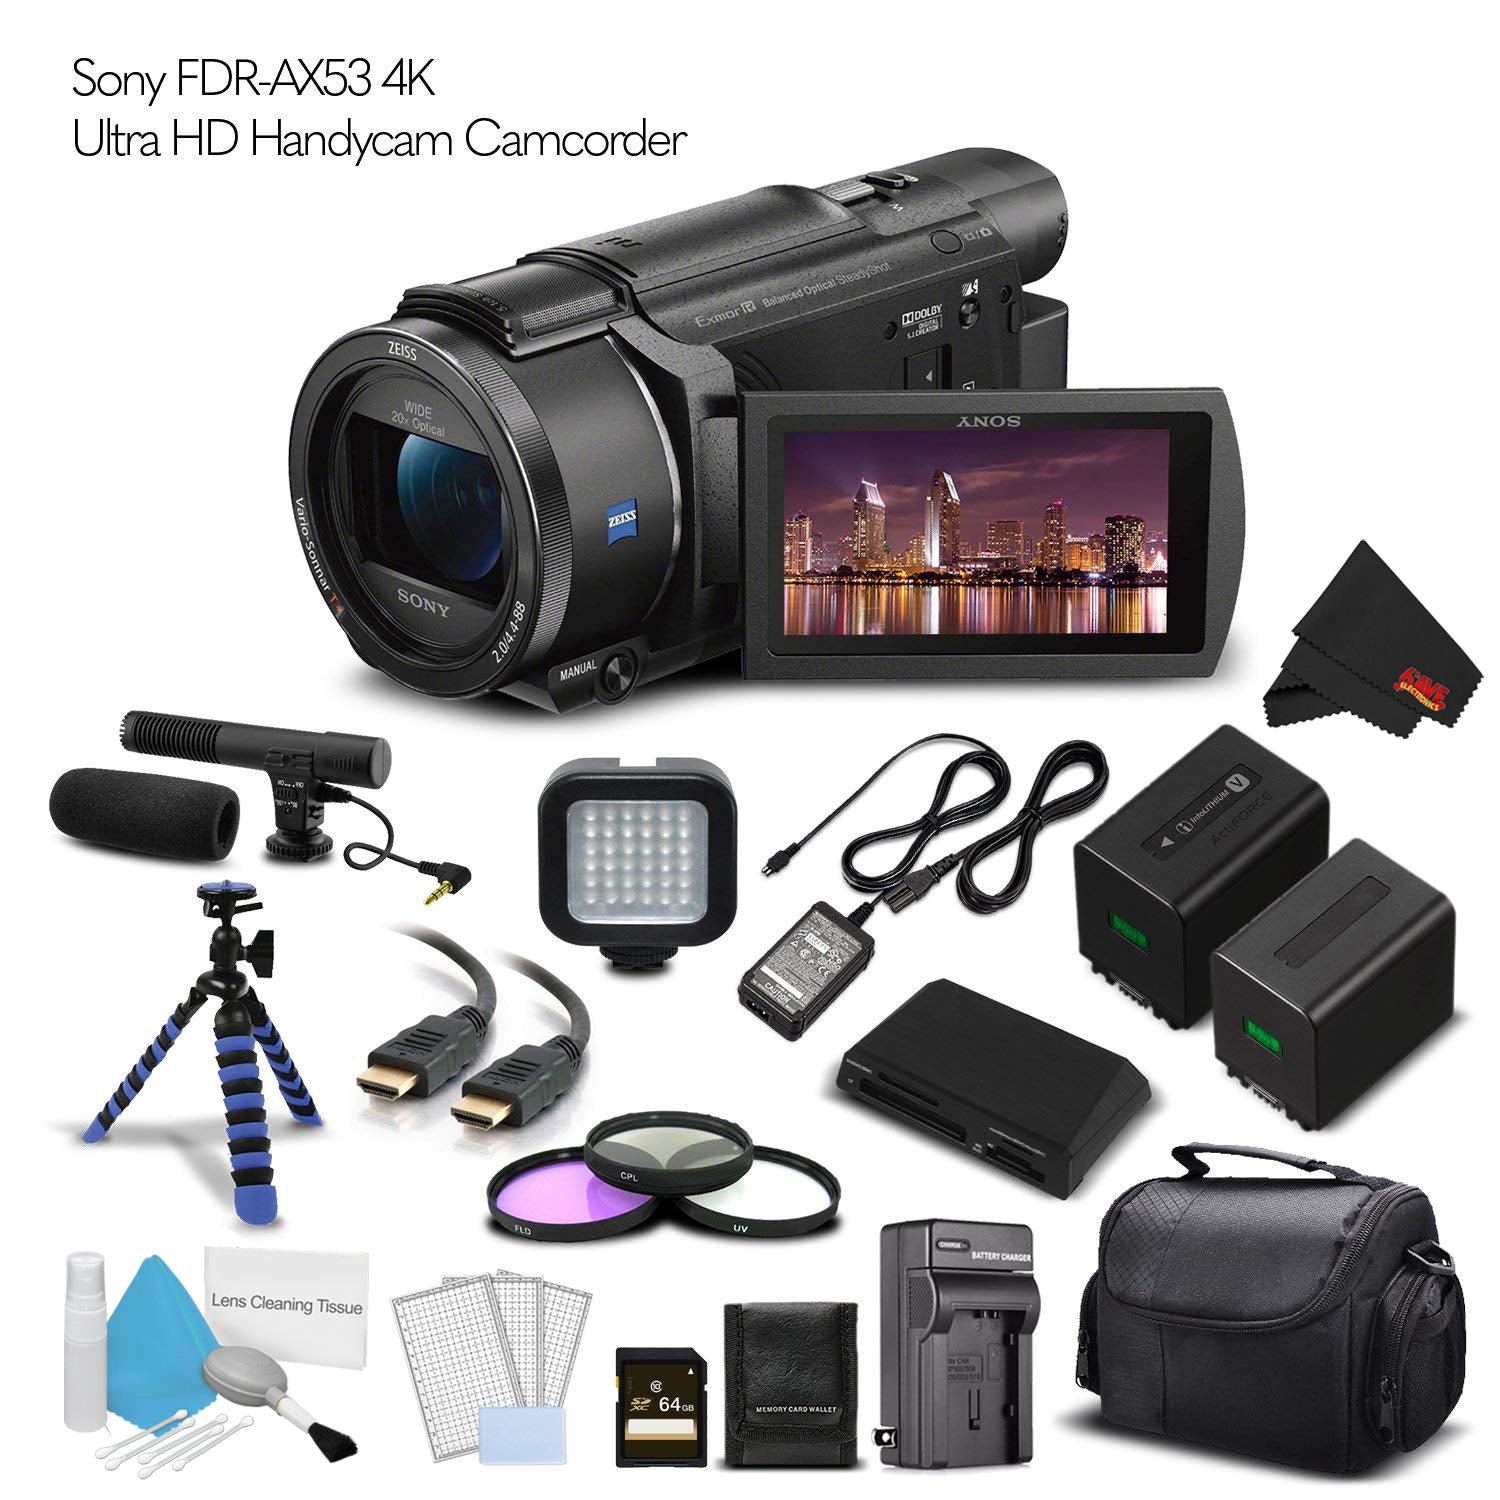 Sony FDR-AX53 4K Ultra HD Handycam Camcorder International Version Extra Battery with Charger + 64GB Memory Card + Tripod Starter Bundle